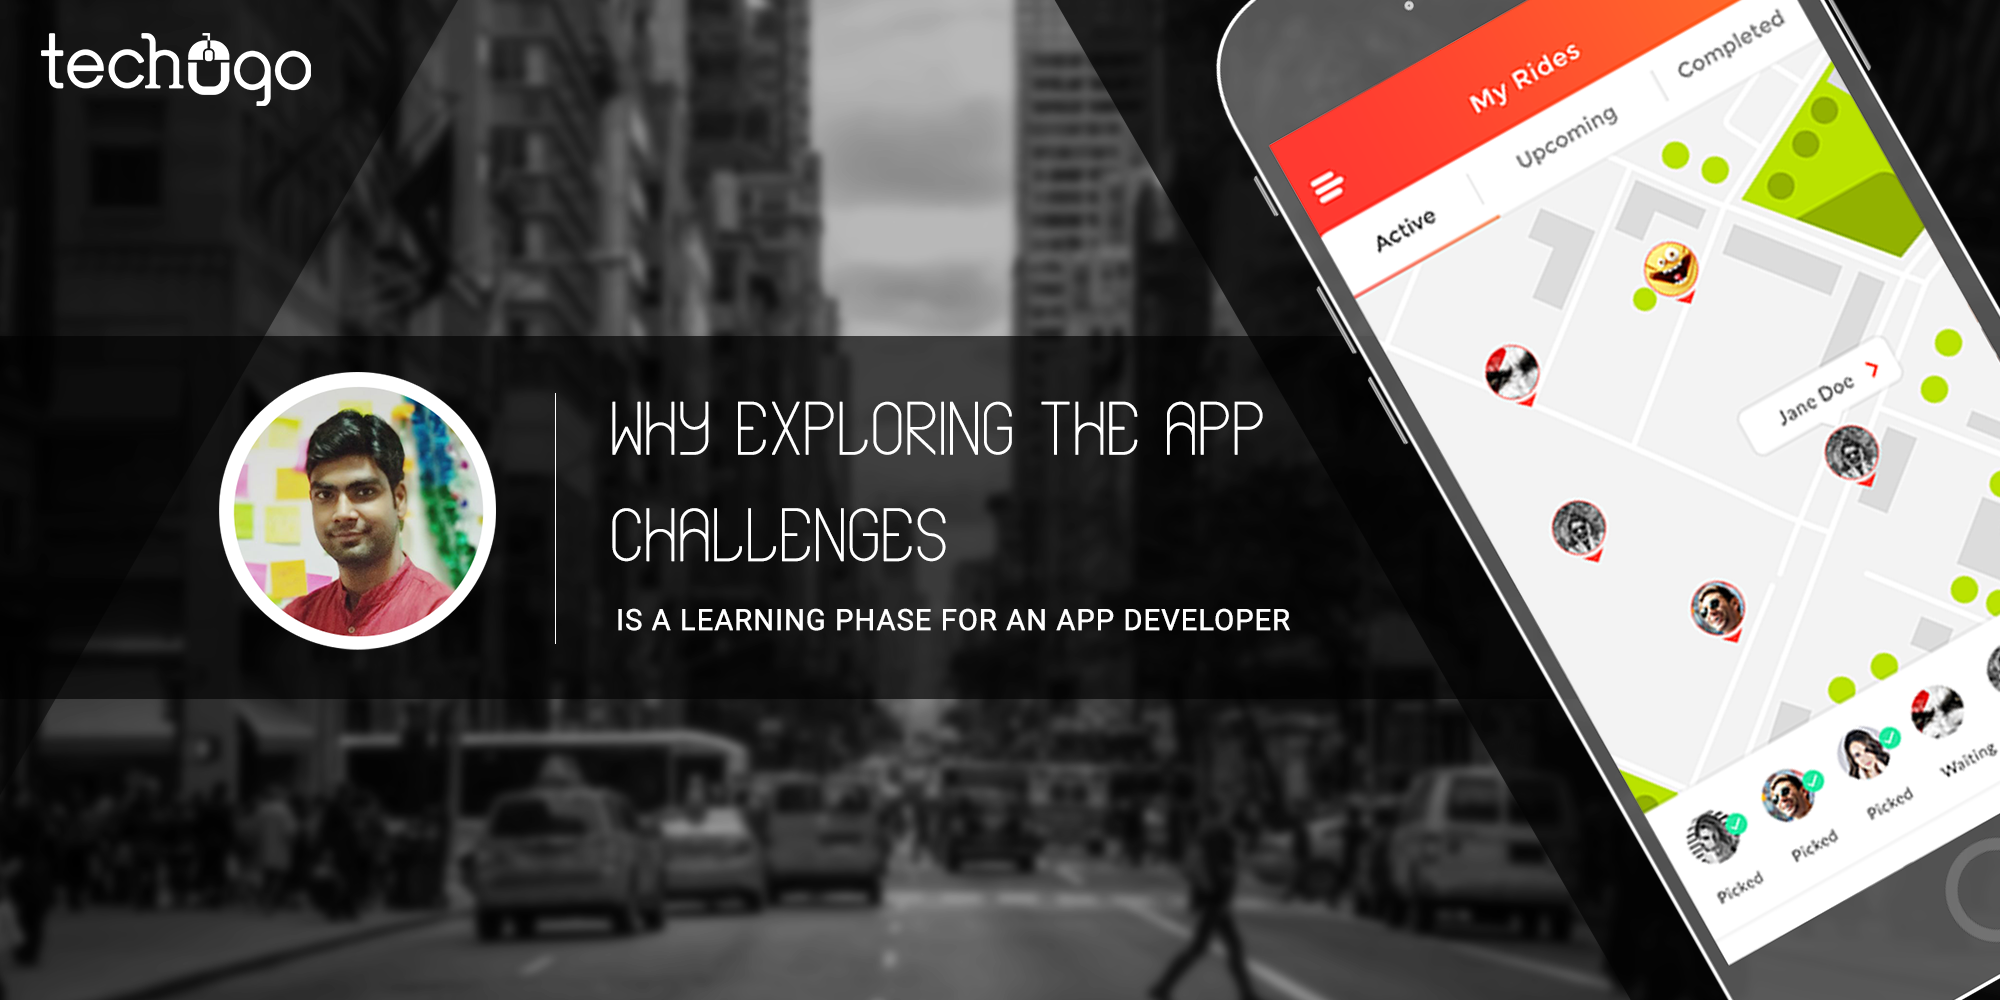 Why Exploring The App Challenges Is A Learning Phase For An App Developer